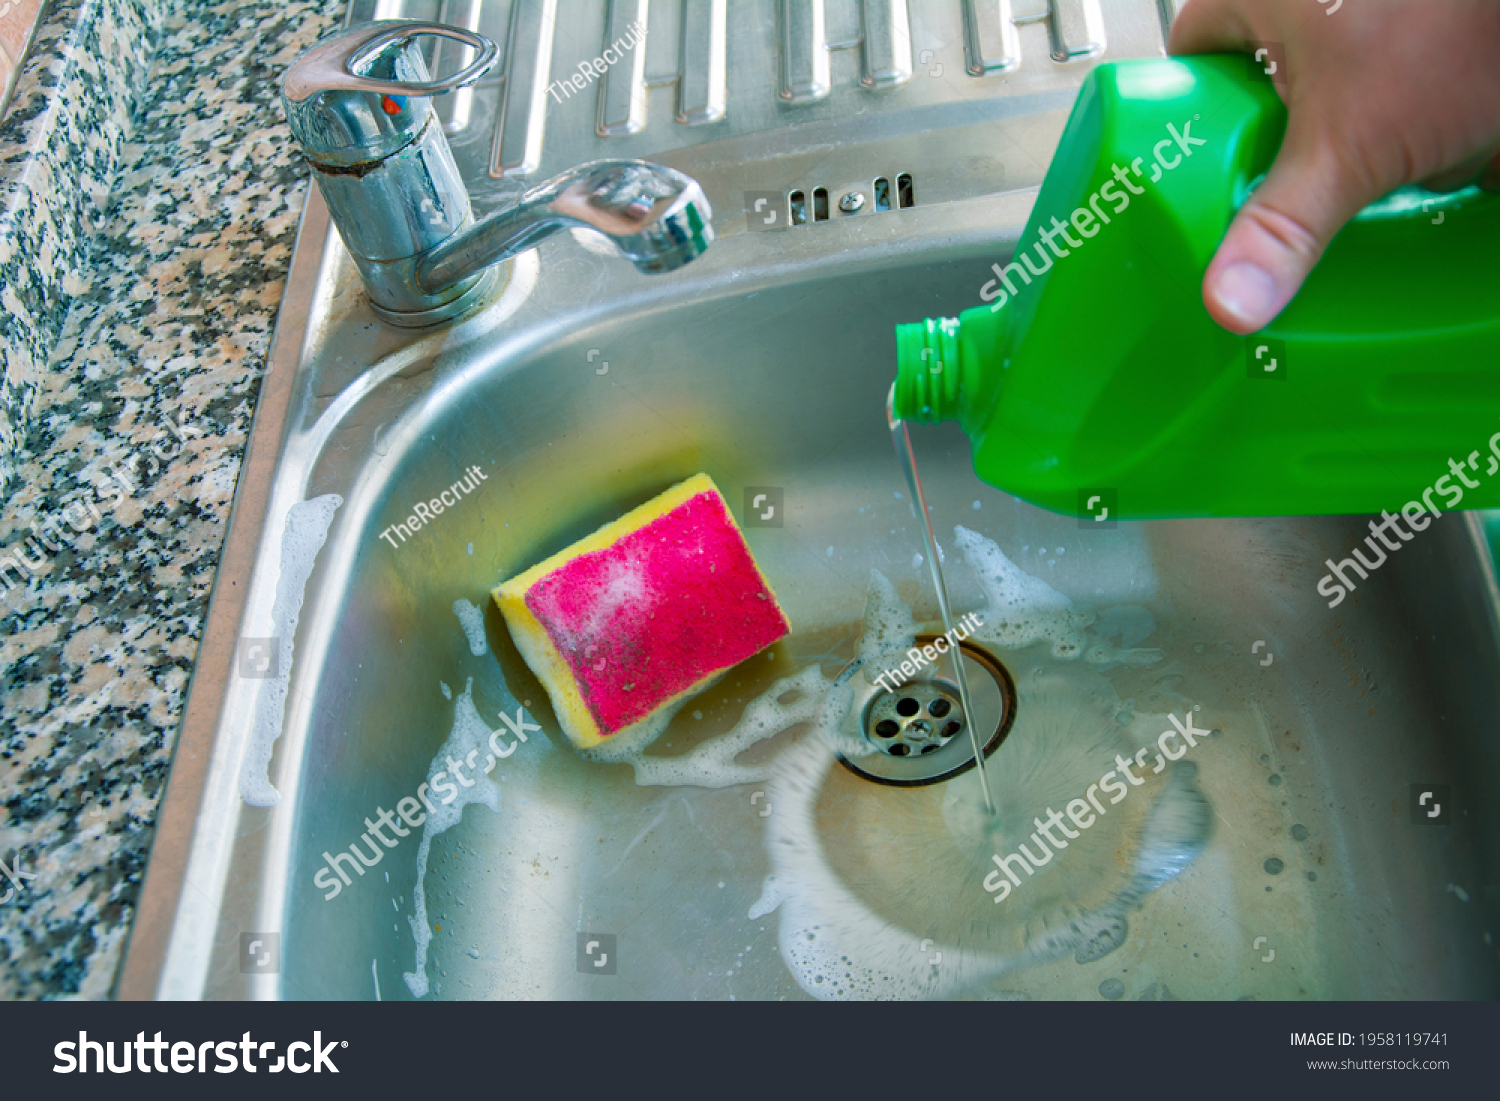 Using bleach to clean the dirty sink #1958119741